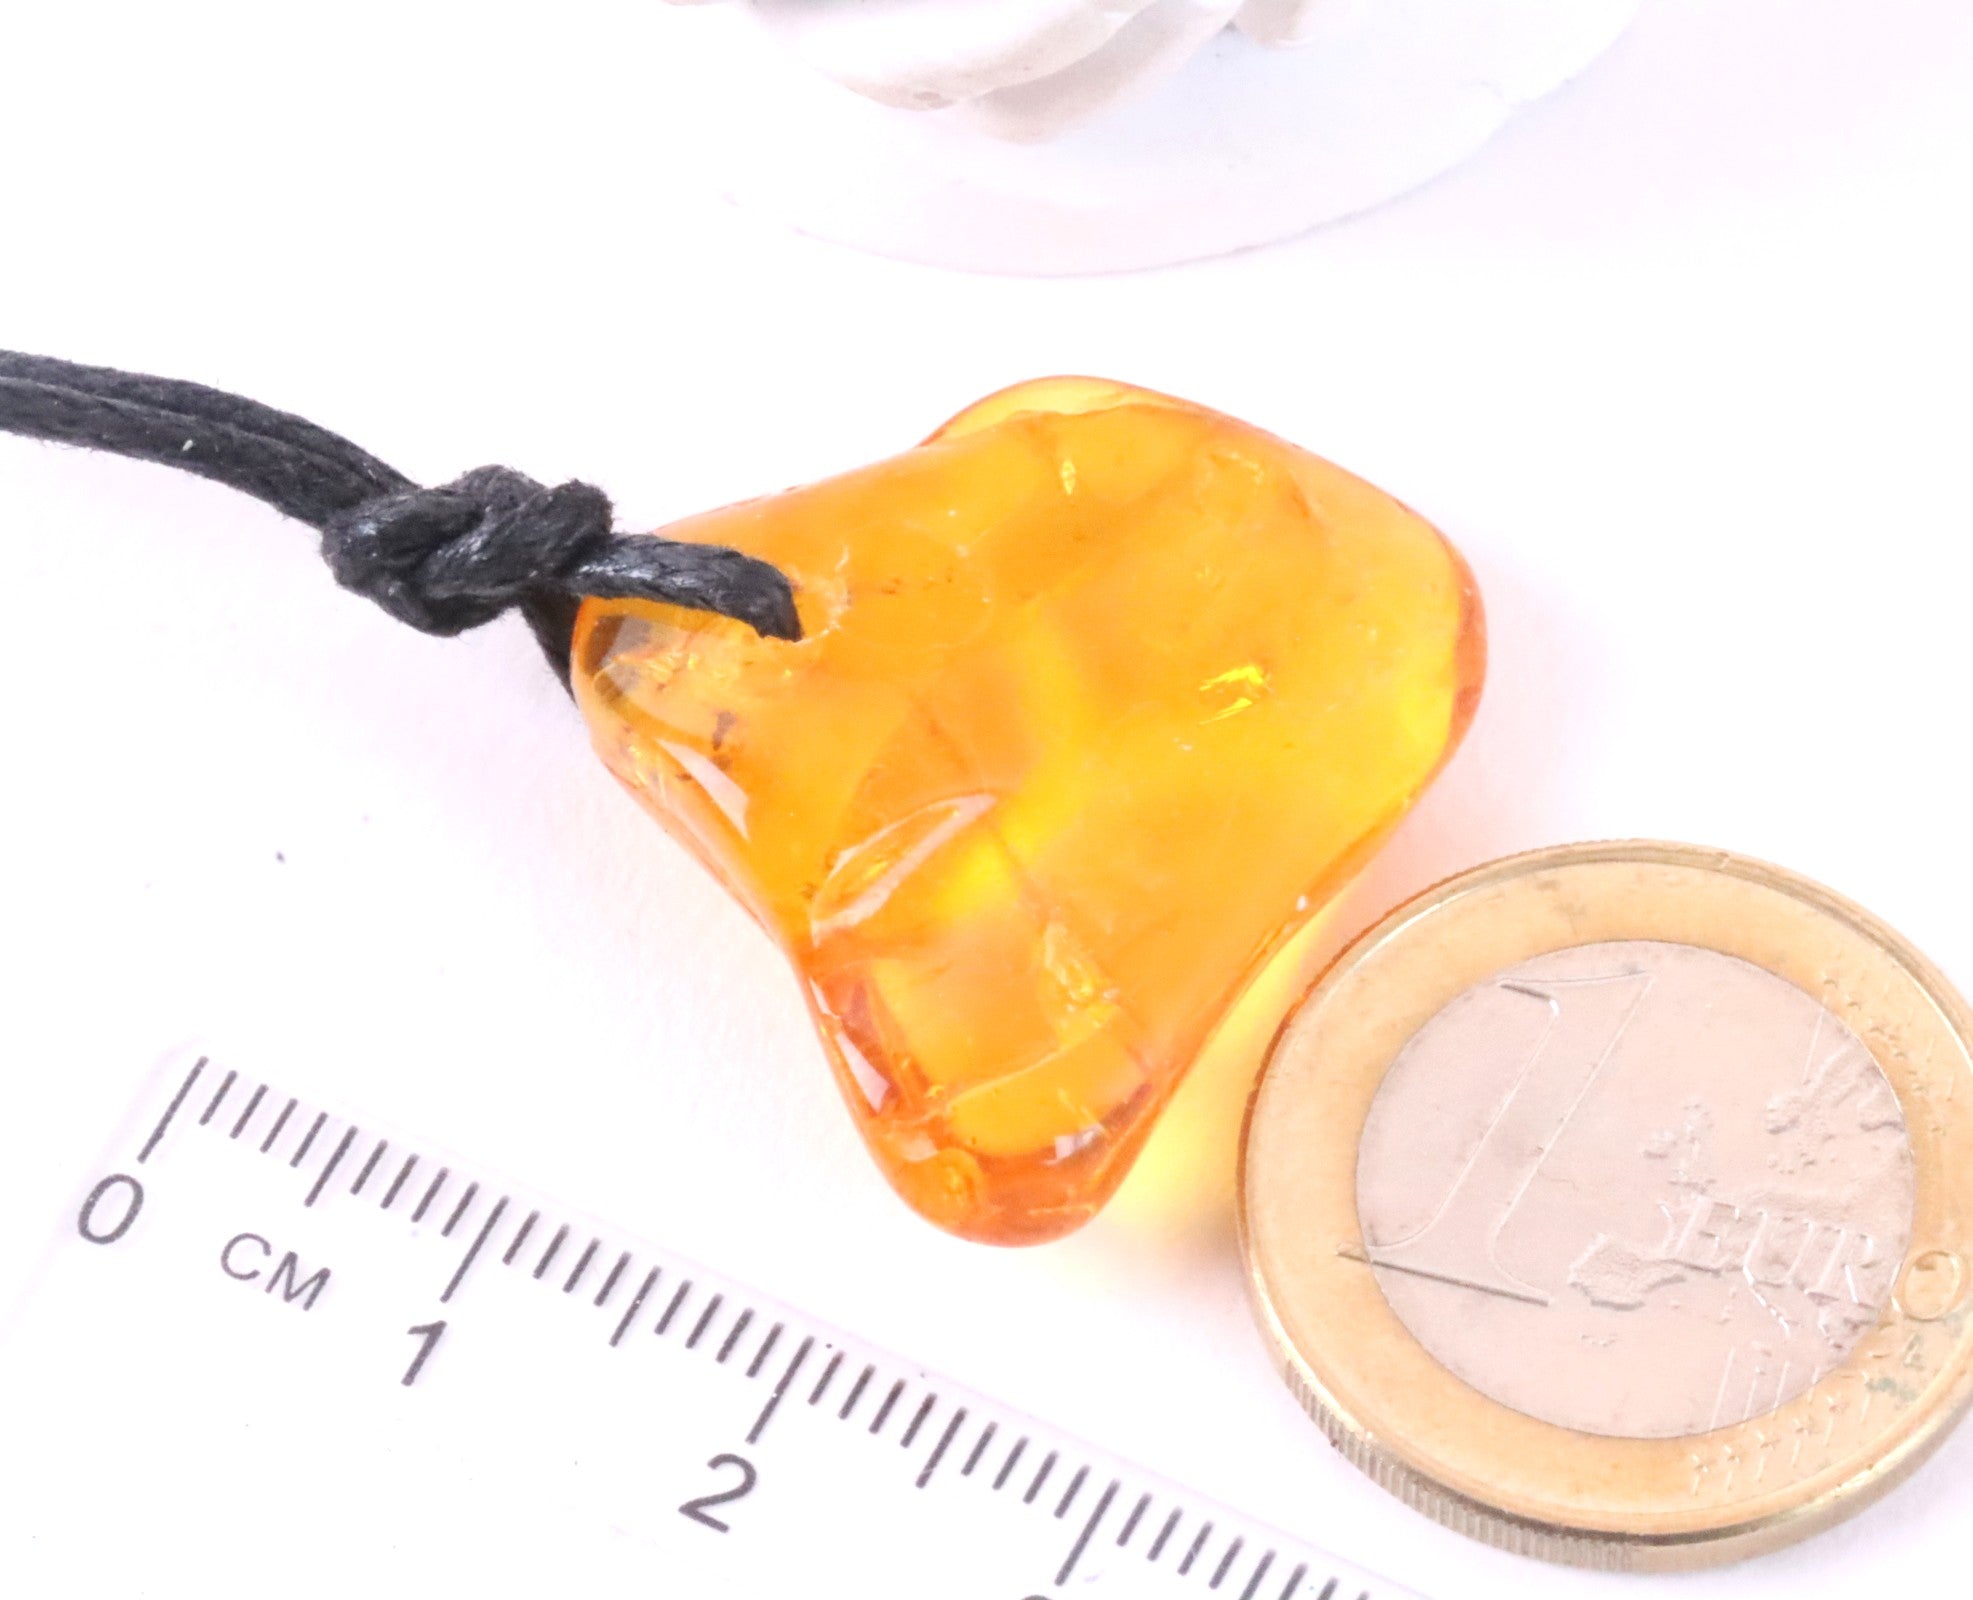 Baltic Amber Amulet 3 X 40 million year old Insect Inclusions in this Amulet